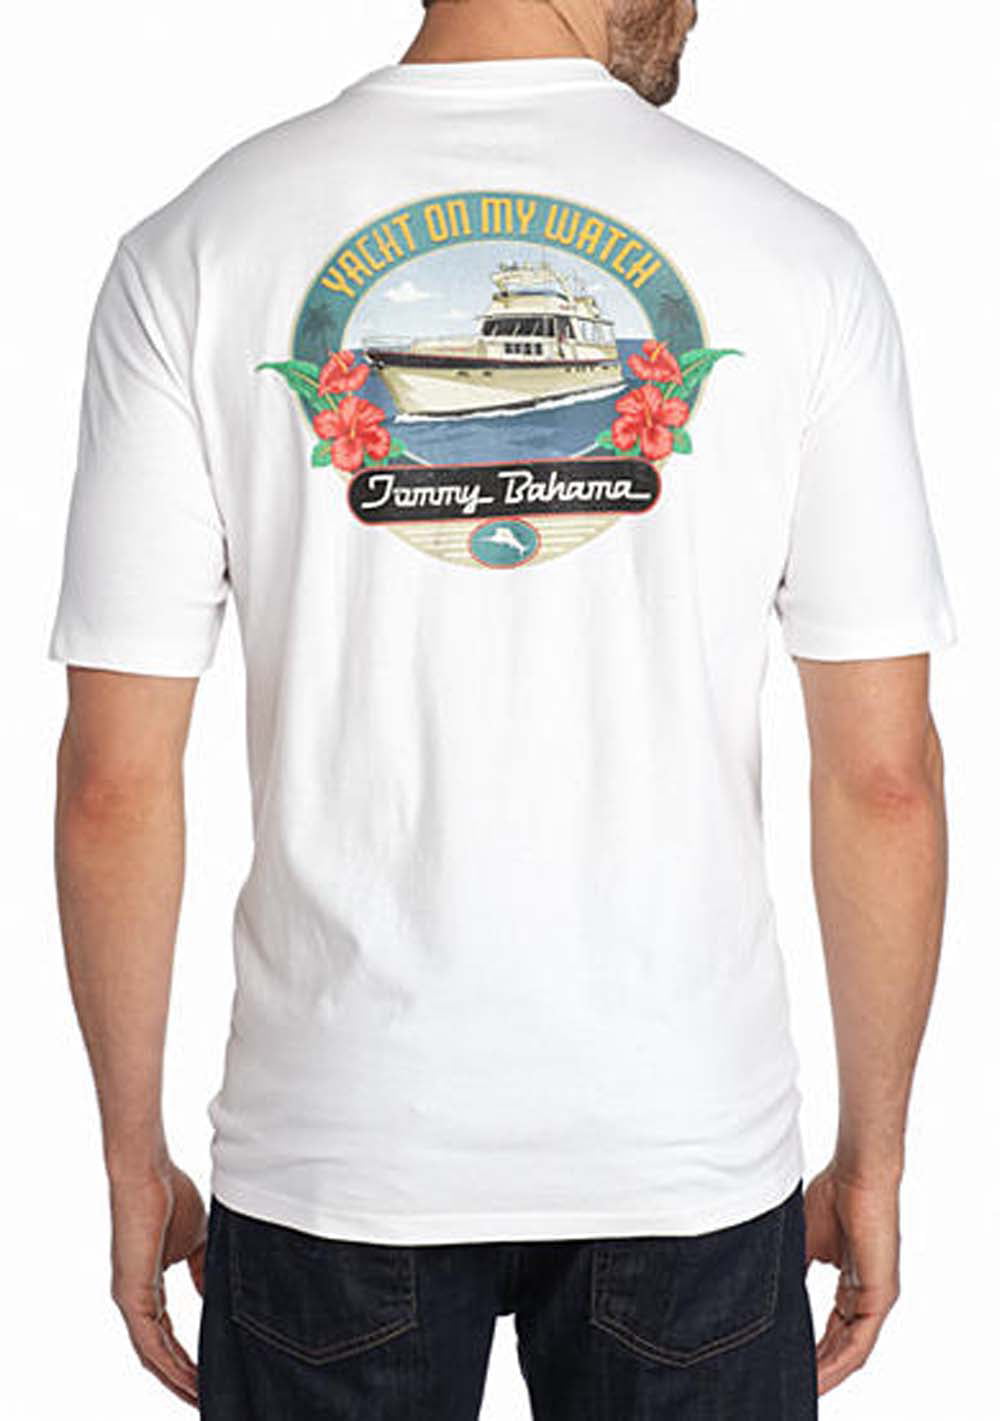 Tommy Bahama - Tommy Bahama Yacht on My Watch Small White T Shirt